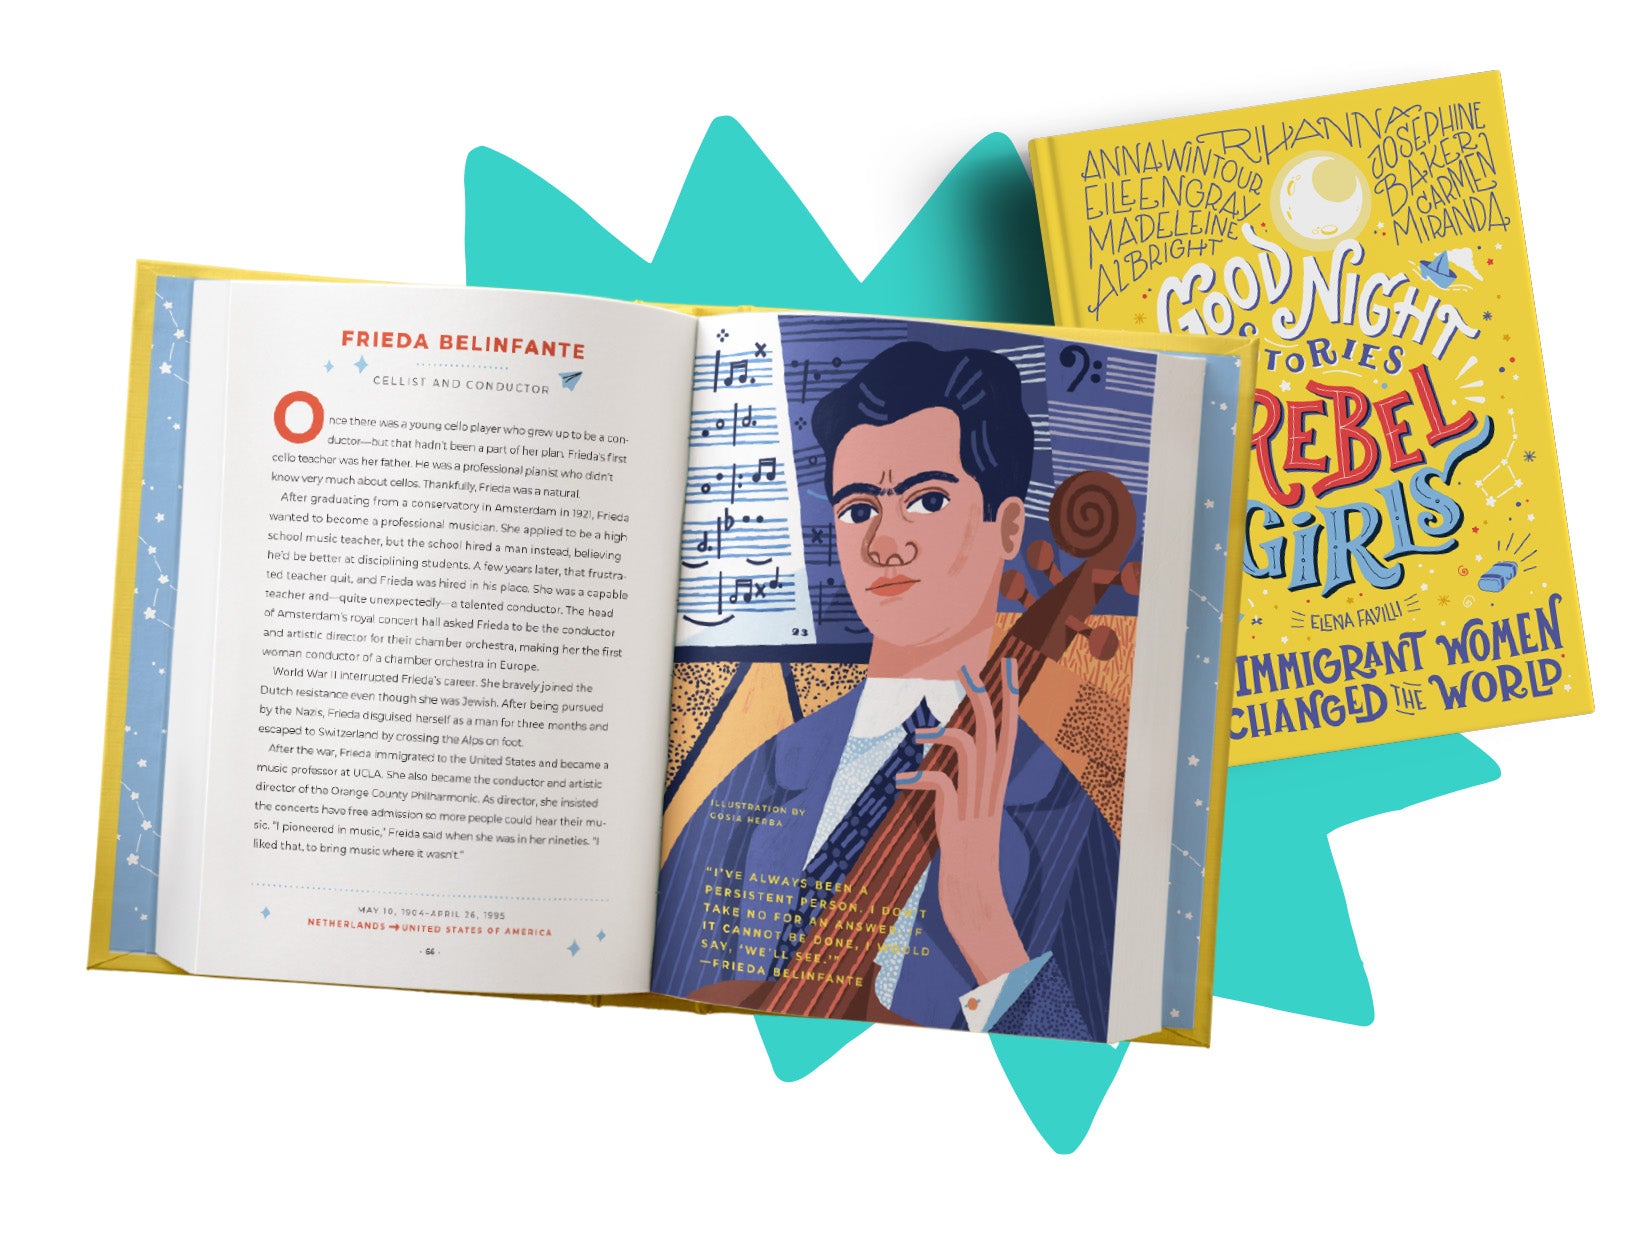 <p><em>Good Night Stories for Rebel Girls: 100 Immigrant Women Who Changed the World</em> is the third book in the New York Times bestselling series for children.</p>
<p>Packed with 100 all-new bedtime stories about the lives of incredible female figures from the past and the present, this volume recognizes women who left their birth countries for a multitude of reasons: some for new opportunities, some out of necessity.</p>
<p>Readers will whip up a plate with Asma Khan, strategize global affairs alongside Madeleine Albright, venture into business with Rihanna, and many more. All of these unique, yet relatable stories are accompanied by gorgeous, full-page, full-color portraits, illustrated by female and nonbinary artists from all over the globe.</p>
